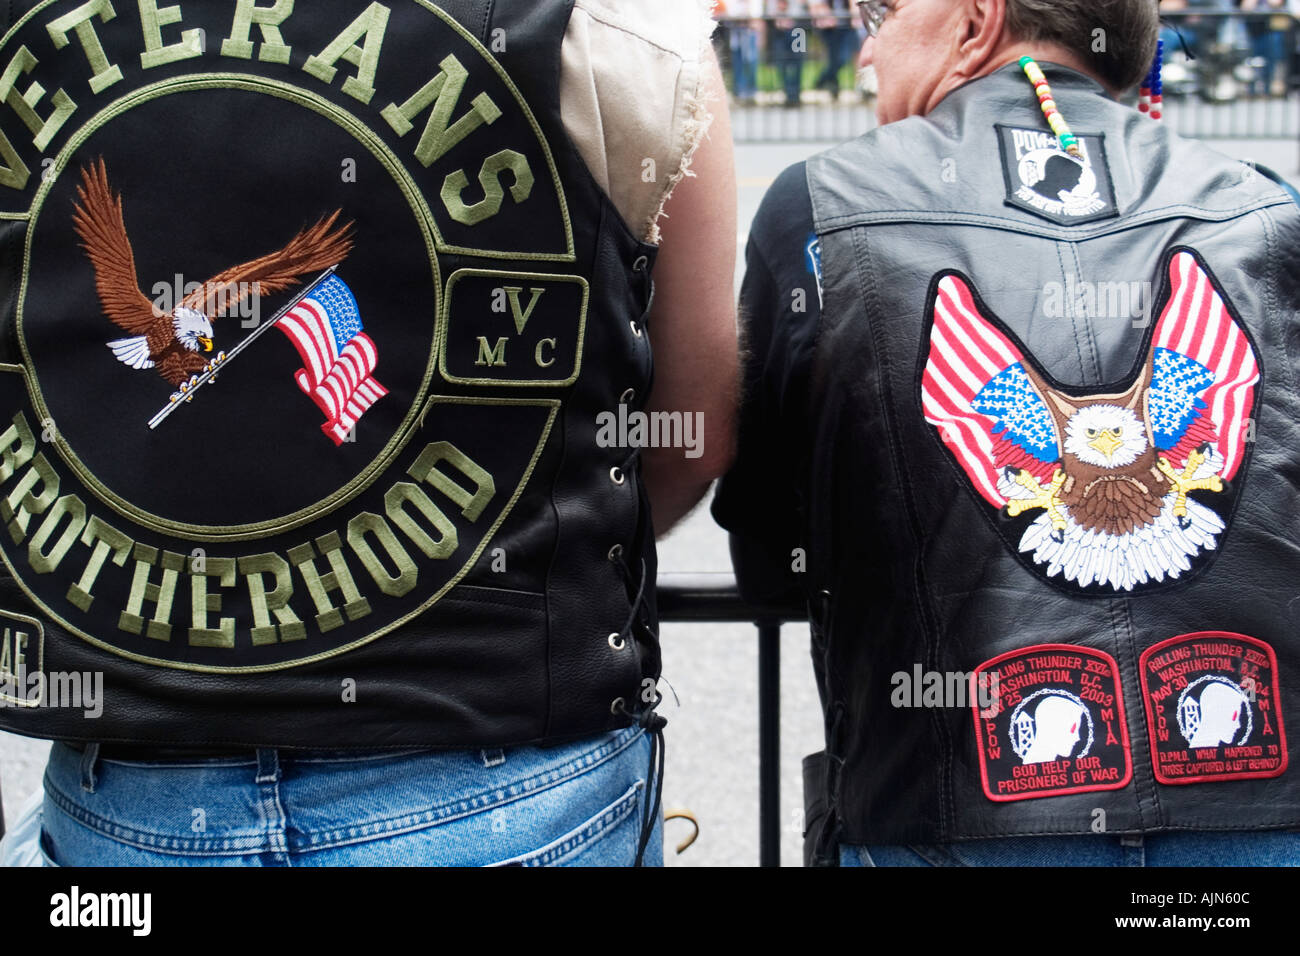 Backside of two motorcyclists Stock Photo